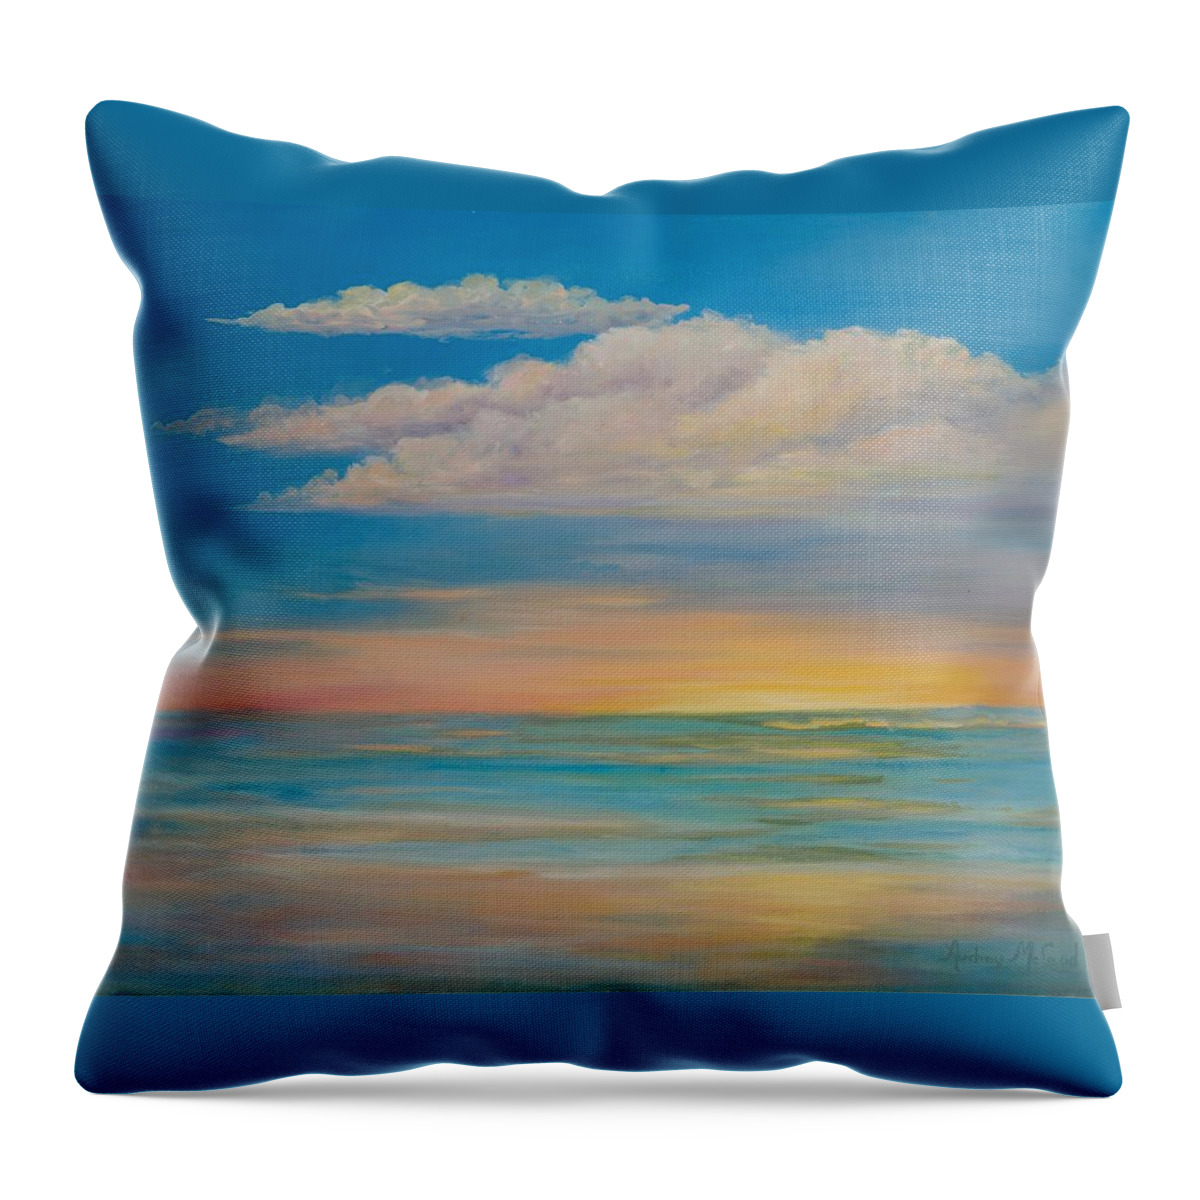 Ocean Sunrise Throw Pillow featuring the painting Pastel Sunrise by Audrey McLeod